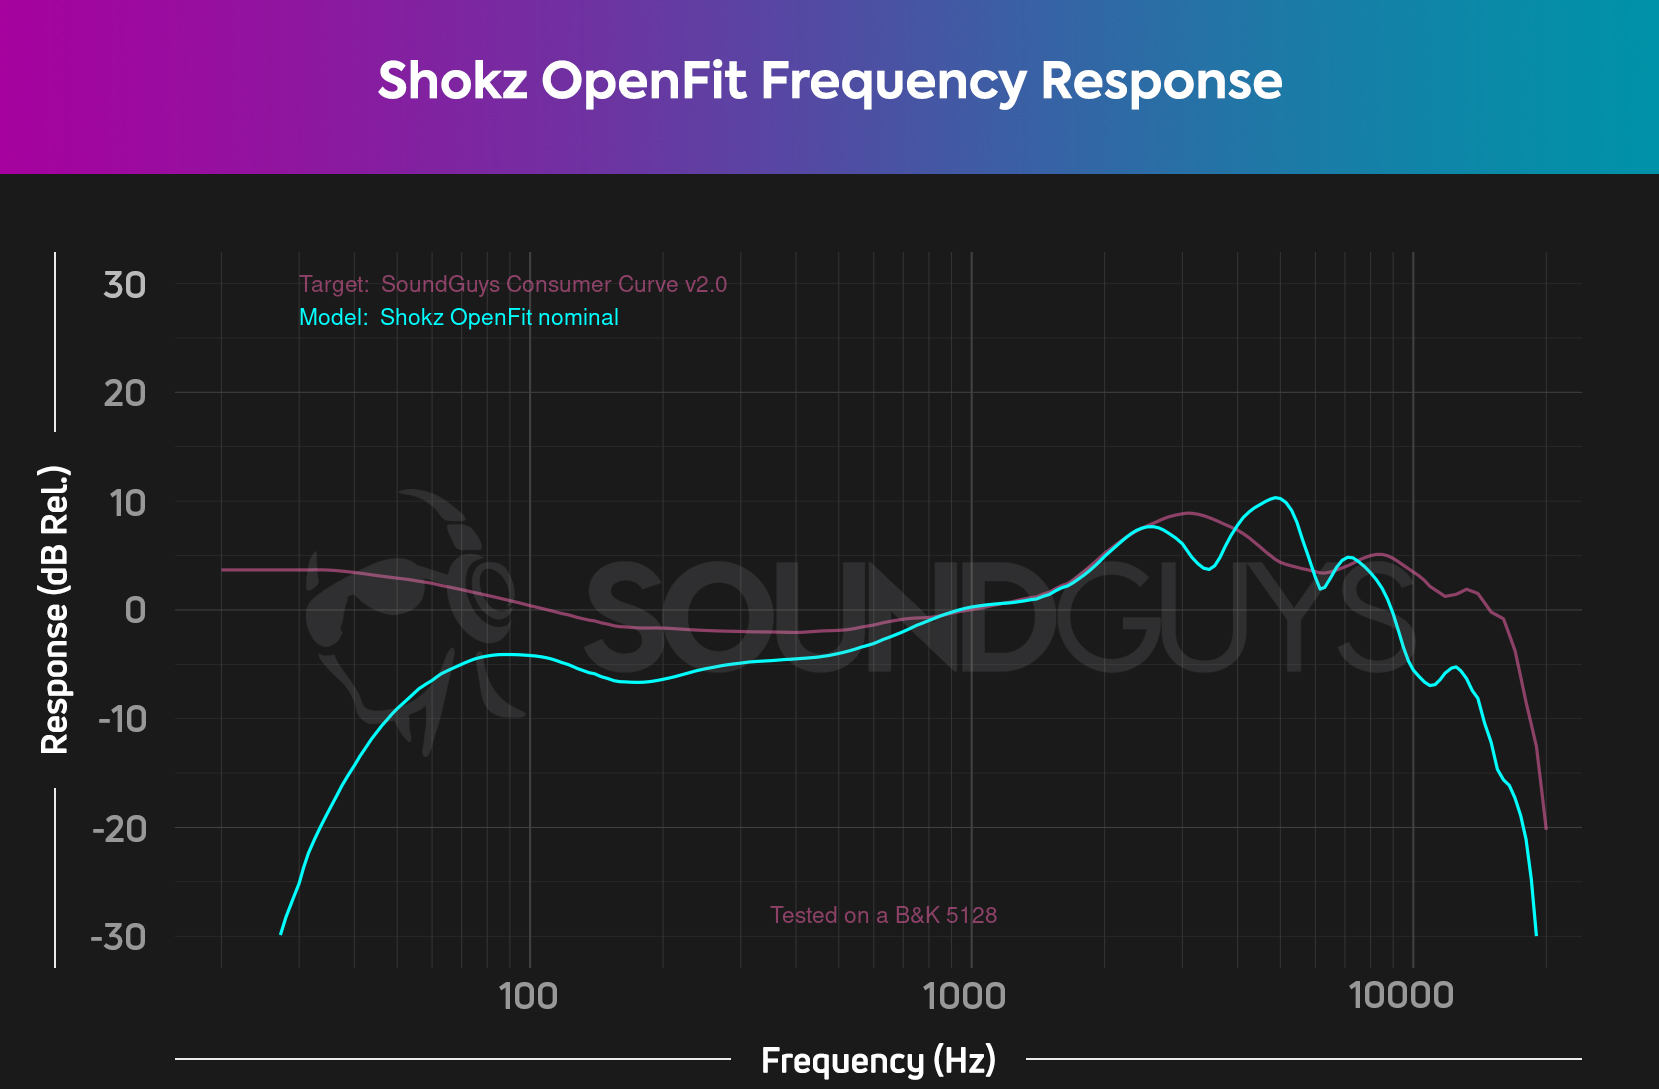 A comparison chart shows the preferred frequency response curve versus the Shokz OpenFit.